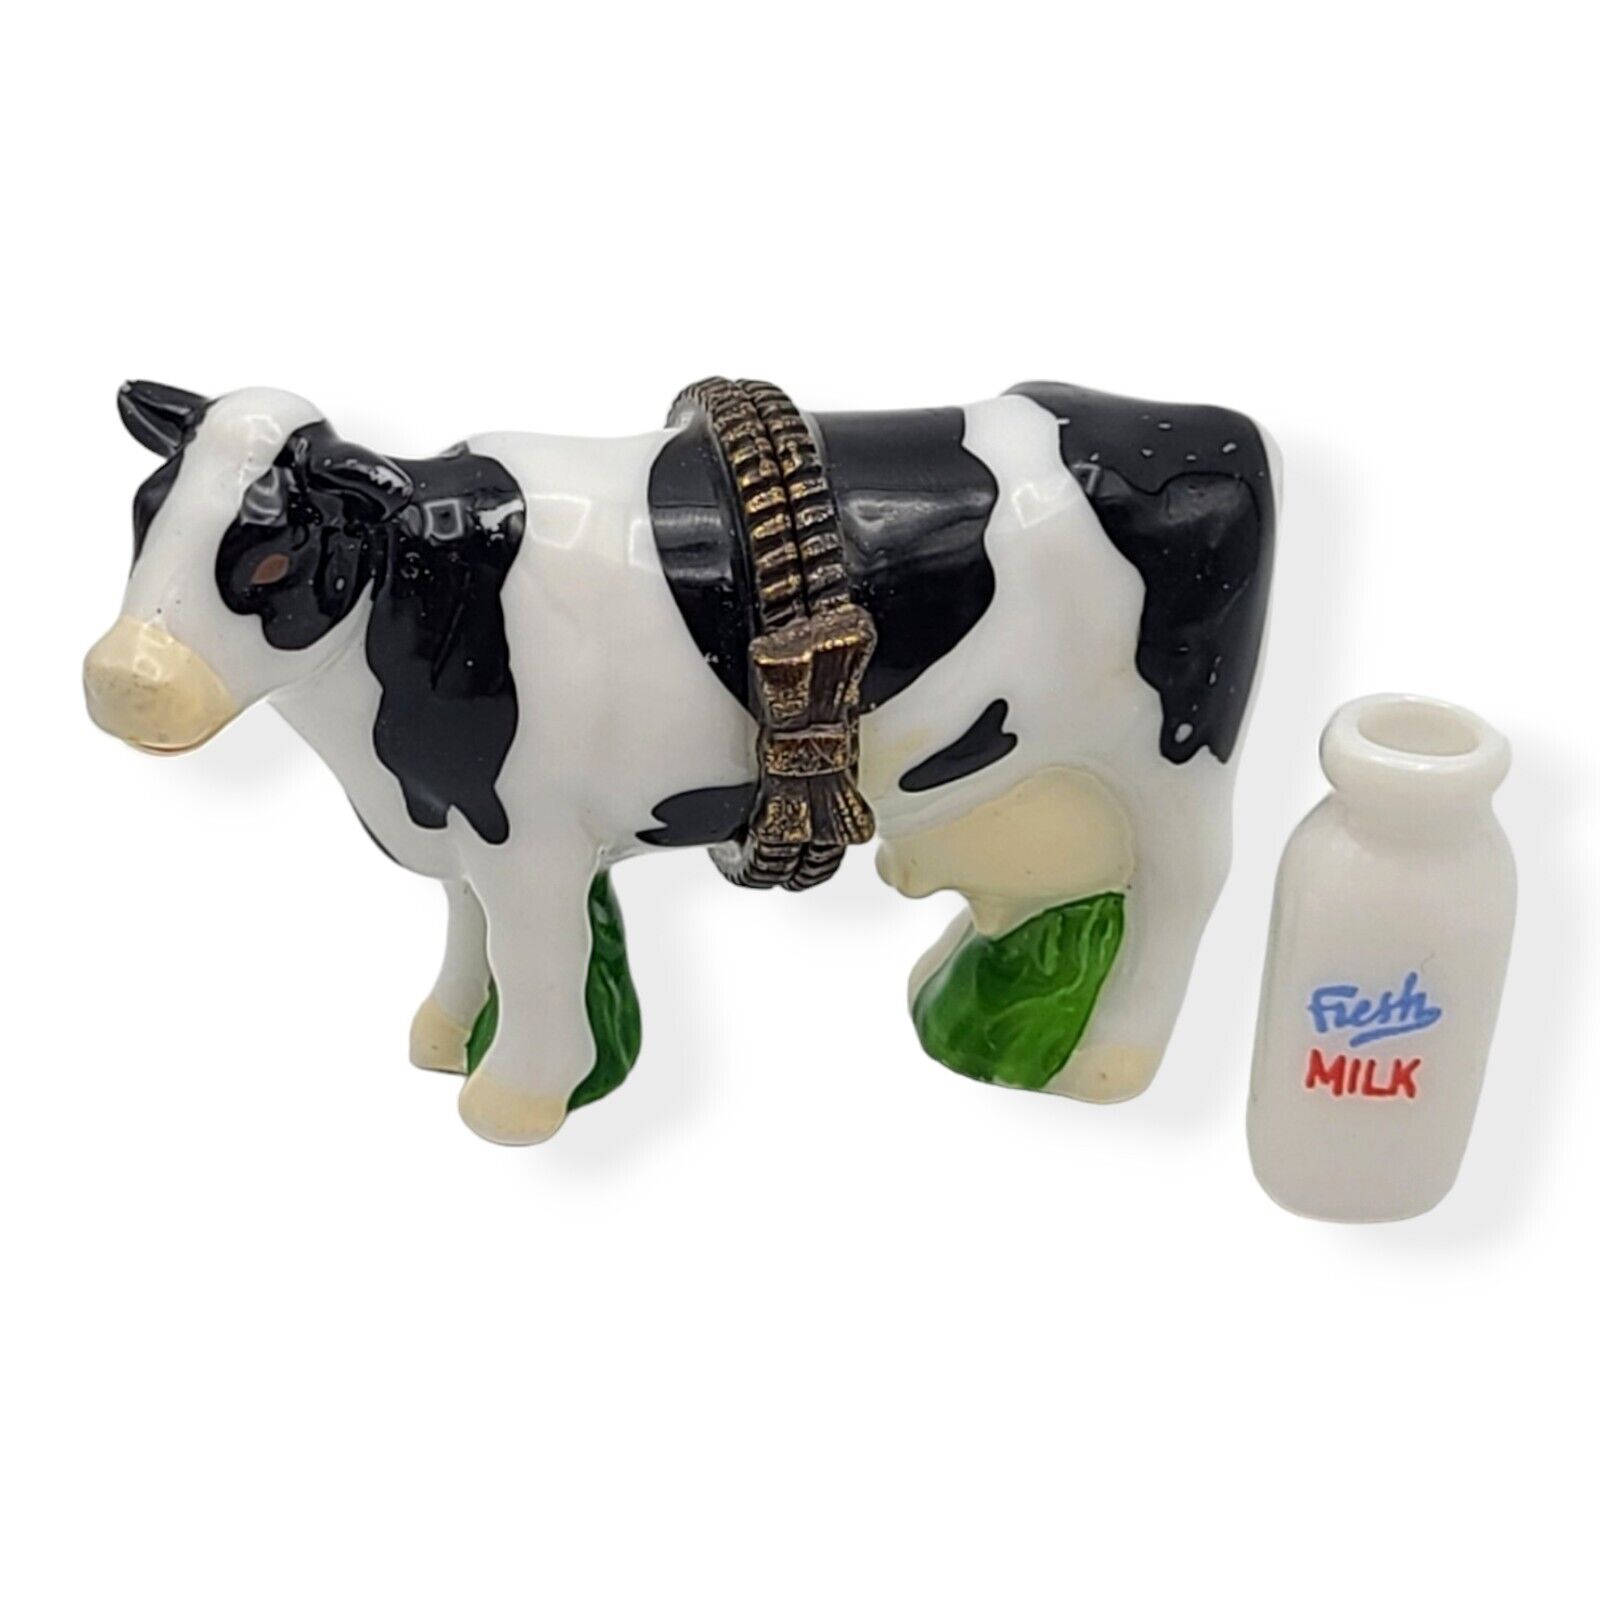 PHB Cow w/ Milk Bottle Trinket Box Porcelain Hinged Midwest of Cannon Falls RARE